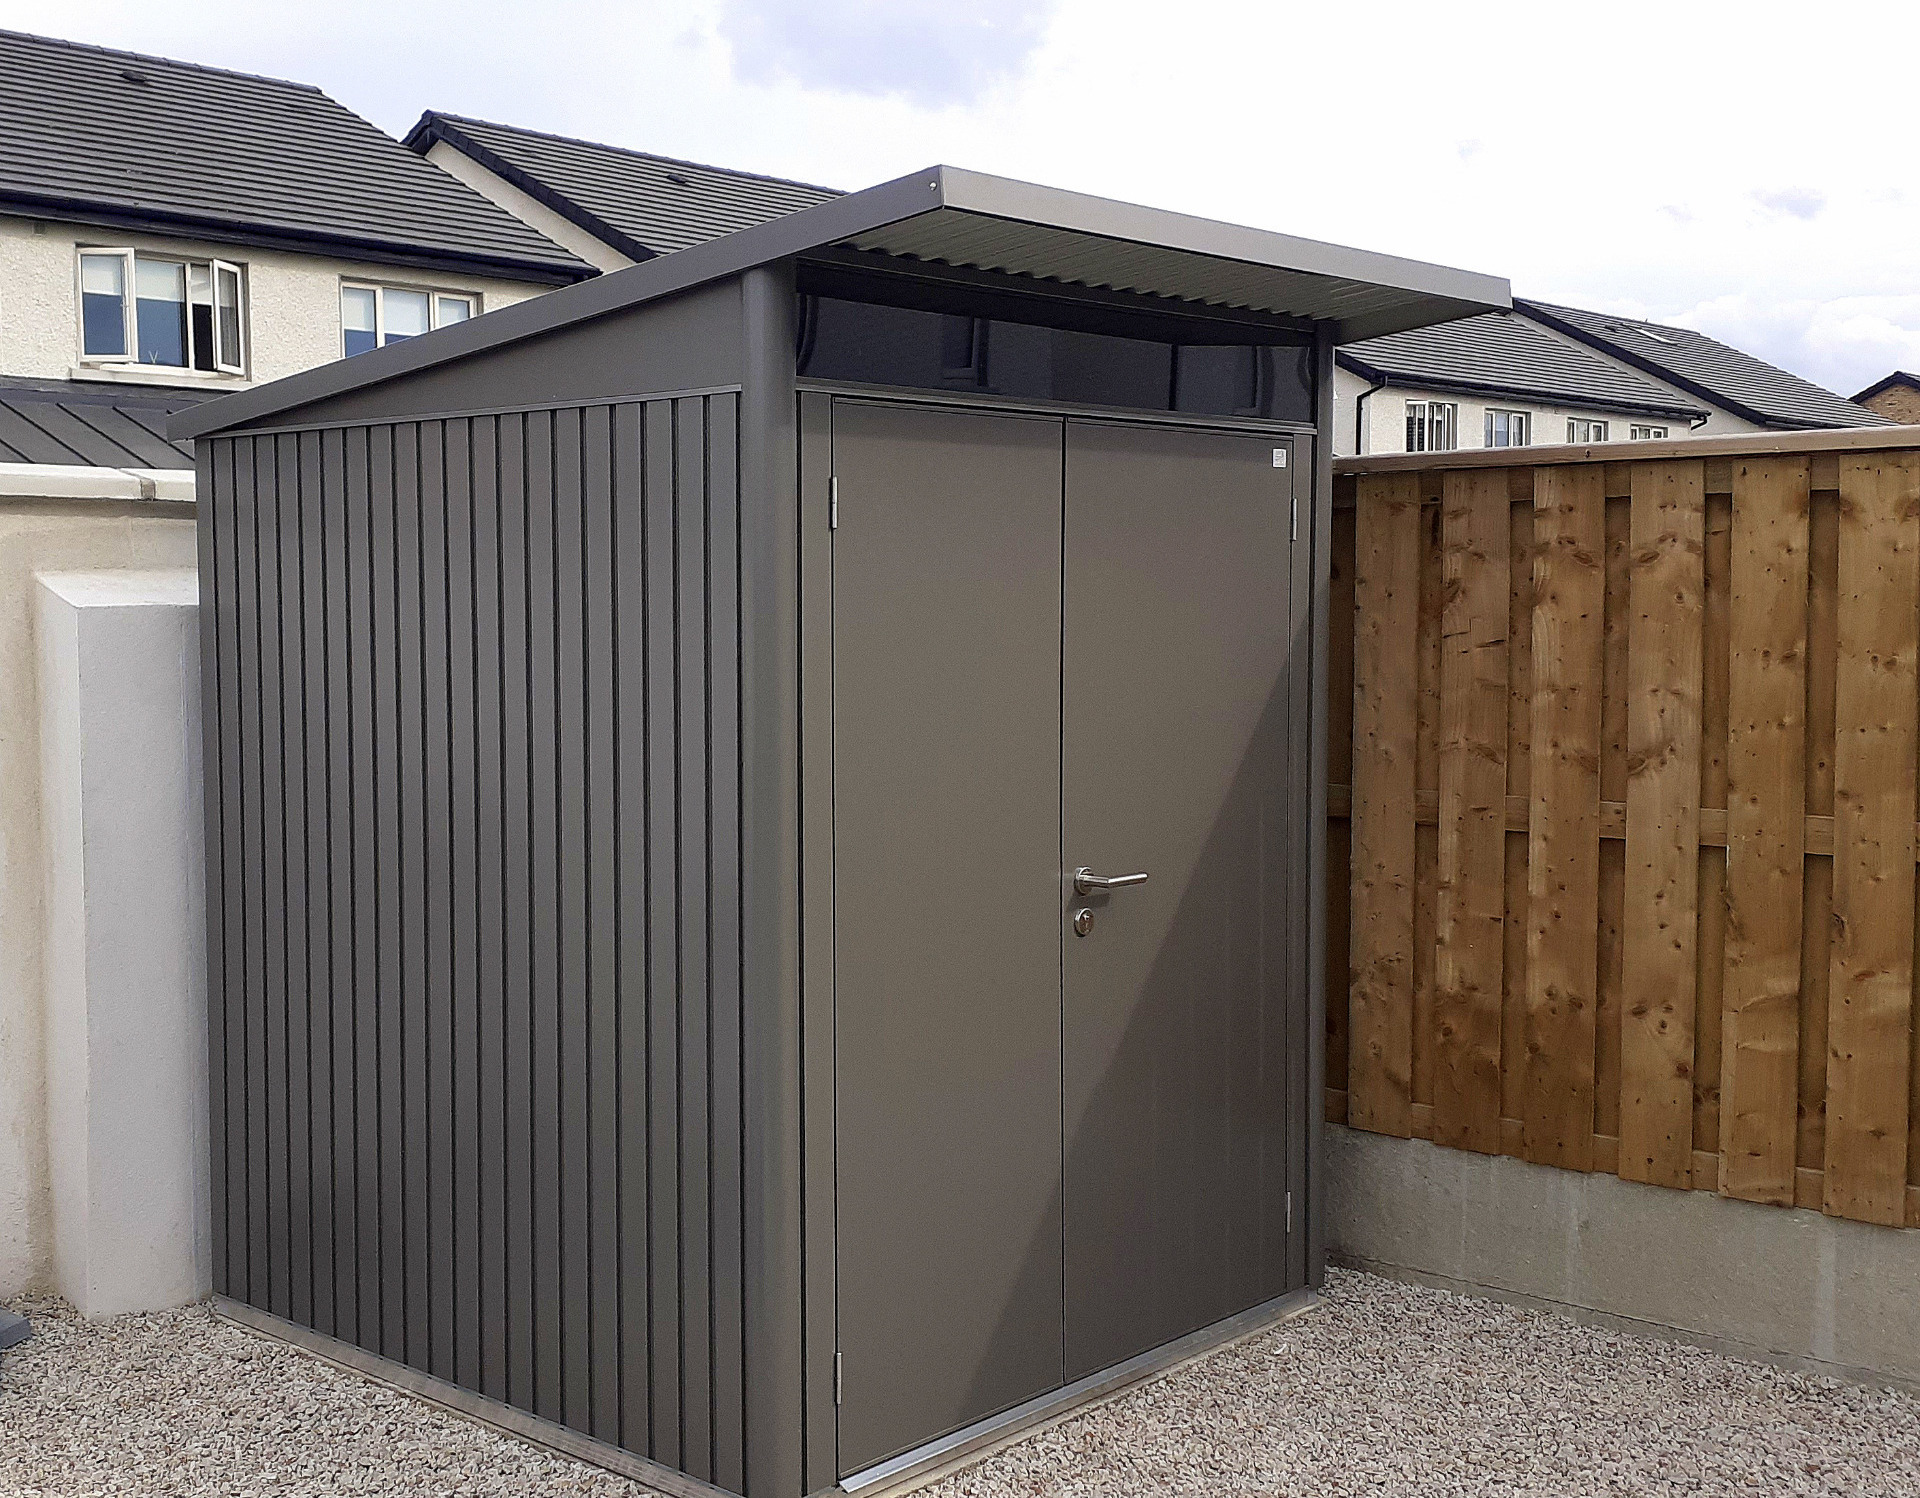 The AvantGarde A1 Garden Shed with optional double doors | Supplied + Fitted in Straffan, Co Kildare  | Owen Chubb Garden Landscapers, Tel 087-2306128